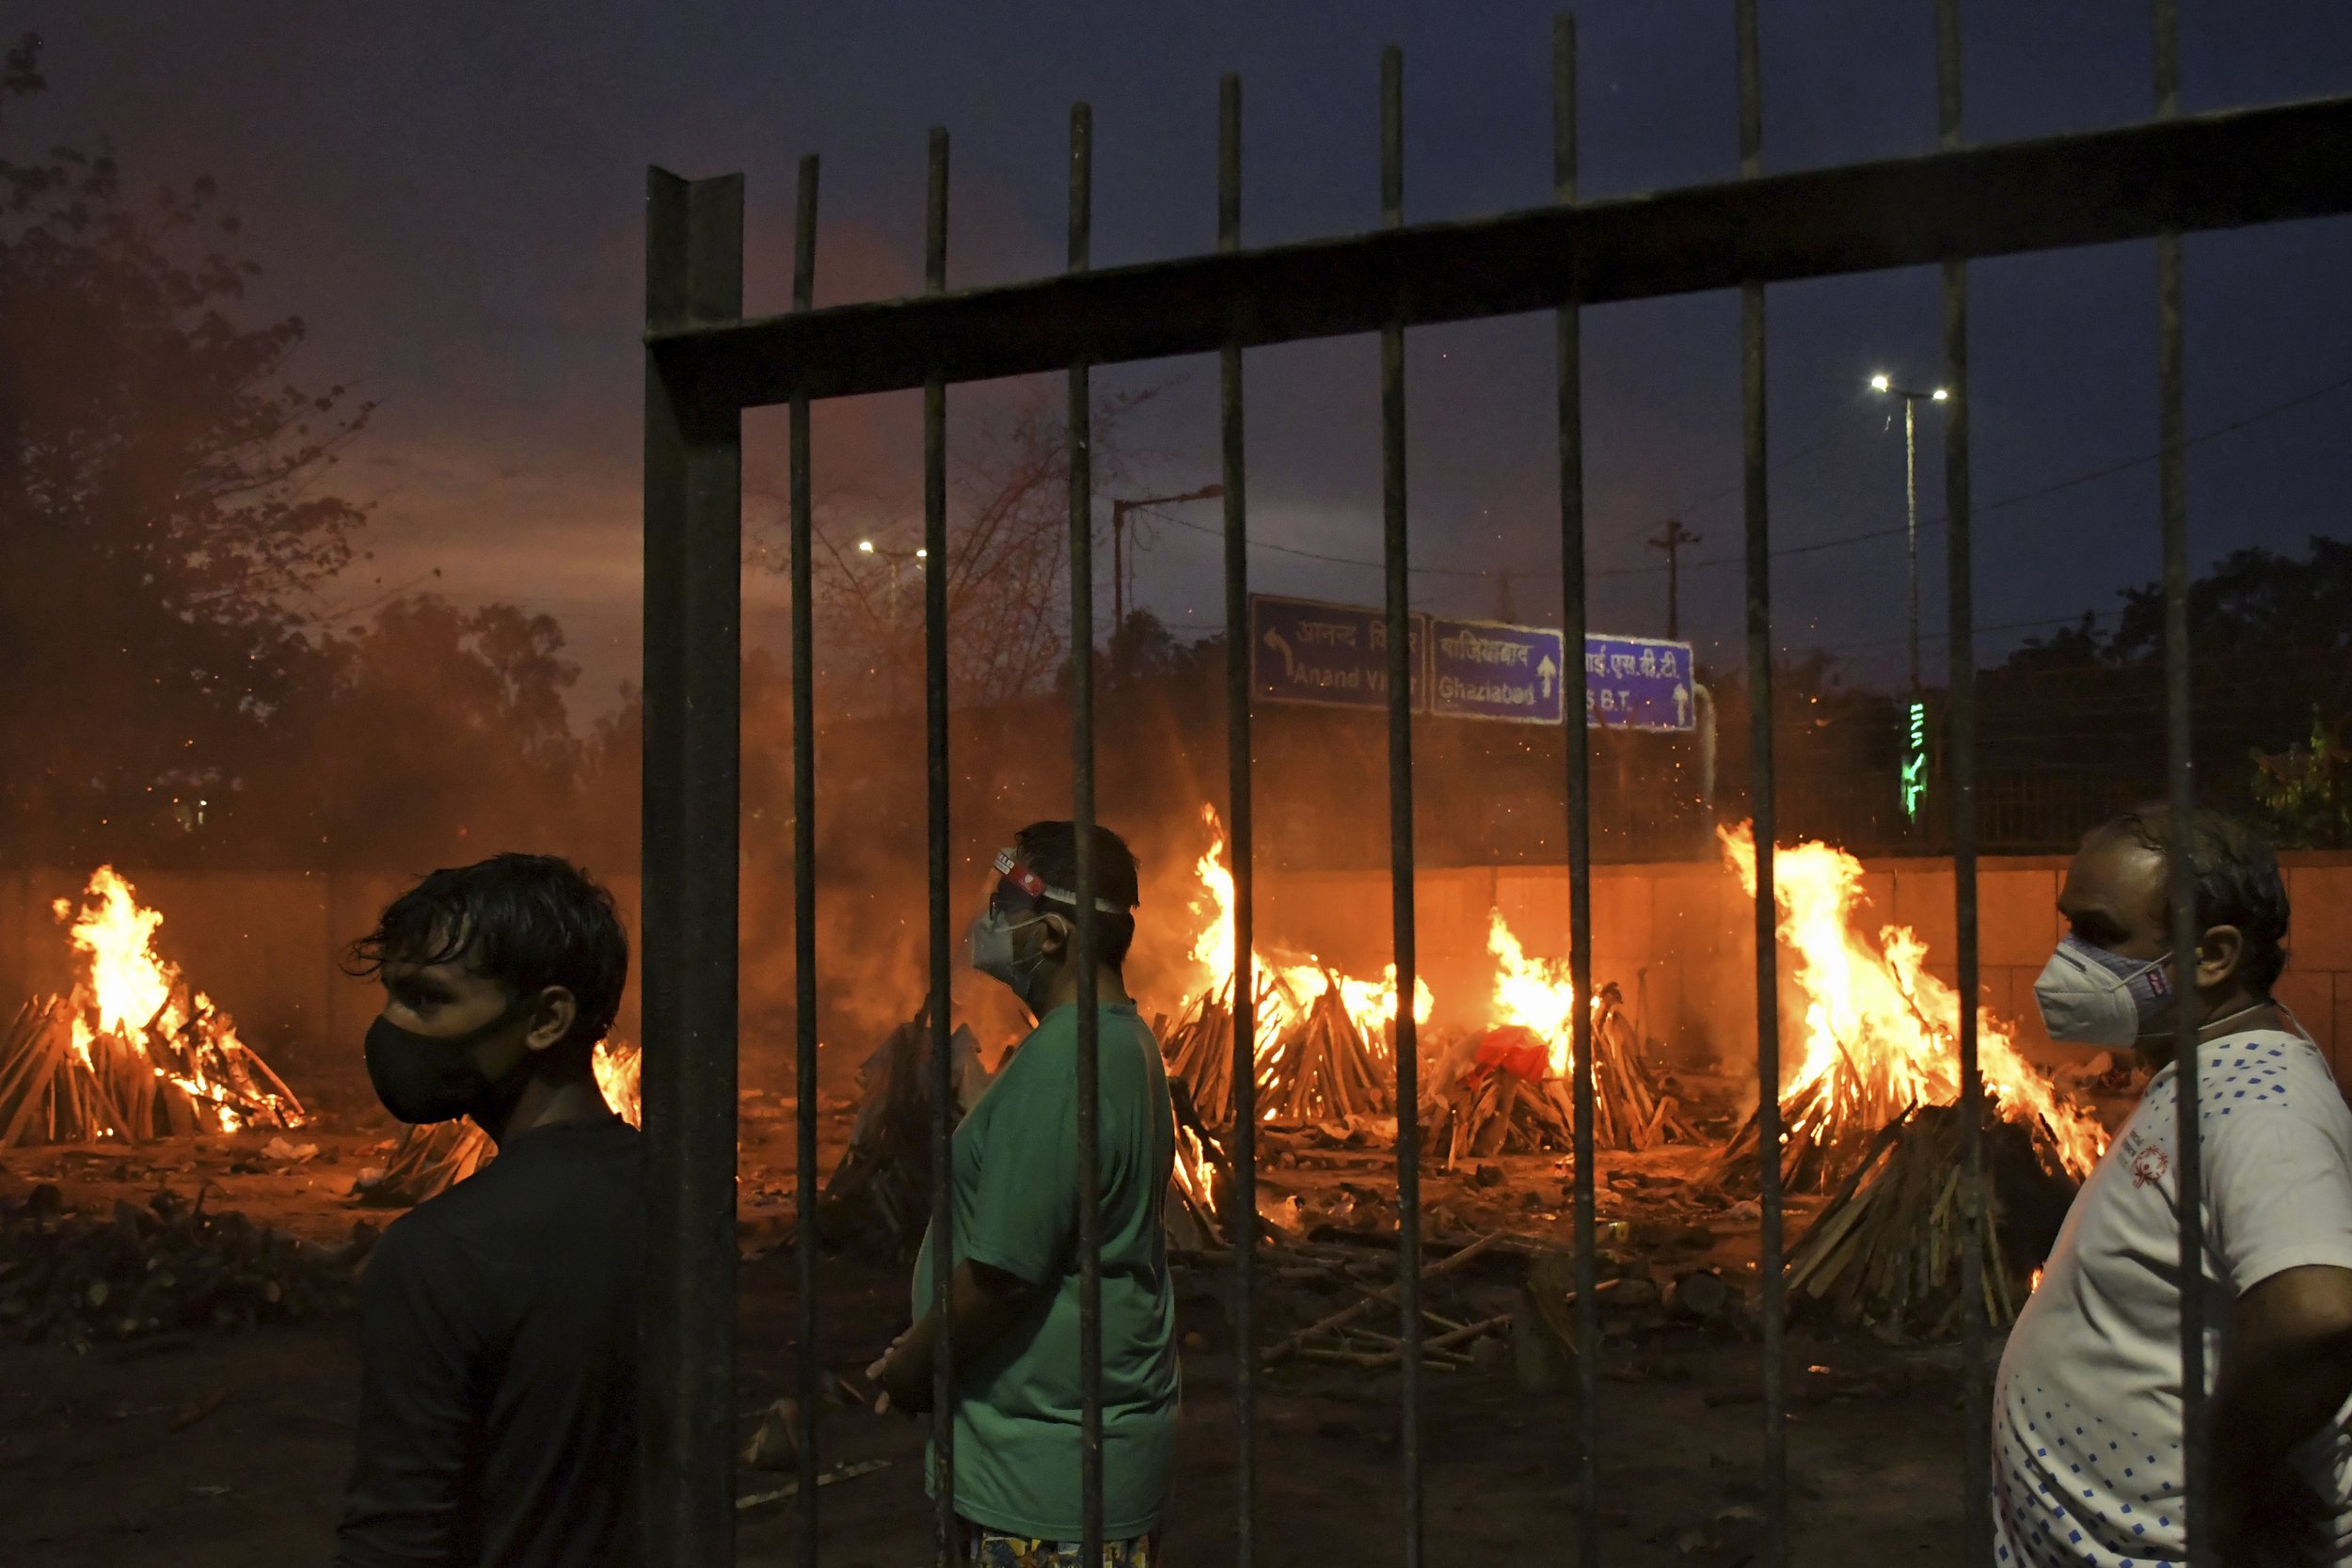  People watch burning funeral pyres of their relatives who died of COVID-19 in a ground that has been converted into a crematorium in New Delhi, India, Thursday, May 6, 2021. Infections in India hit another grim daily record on Thursday as demand for